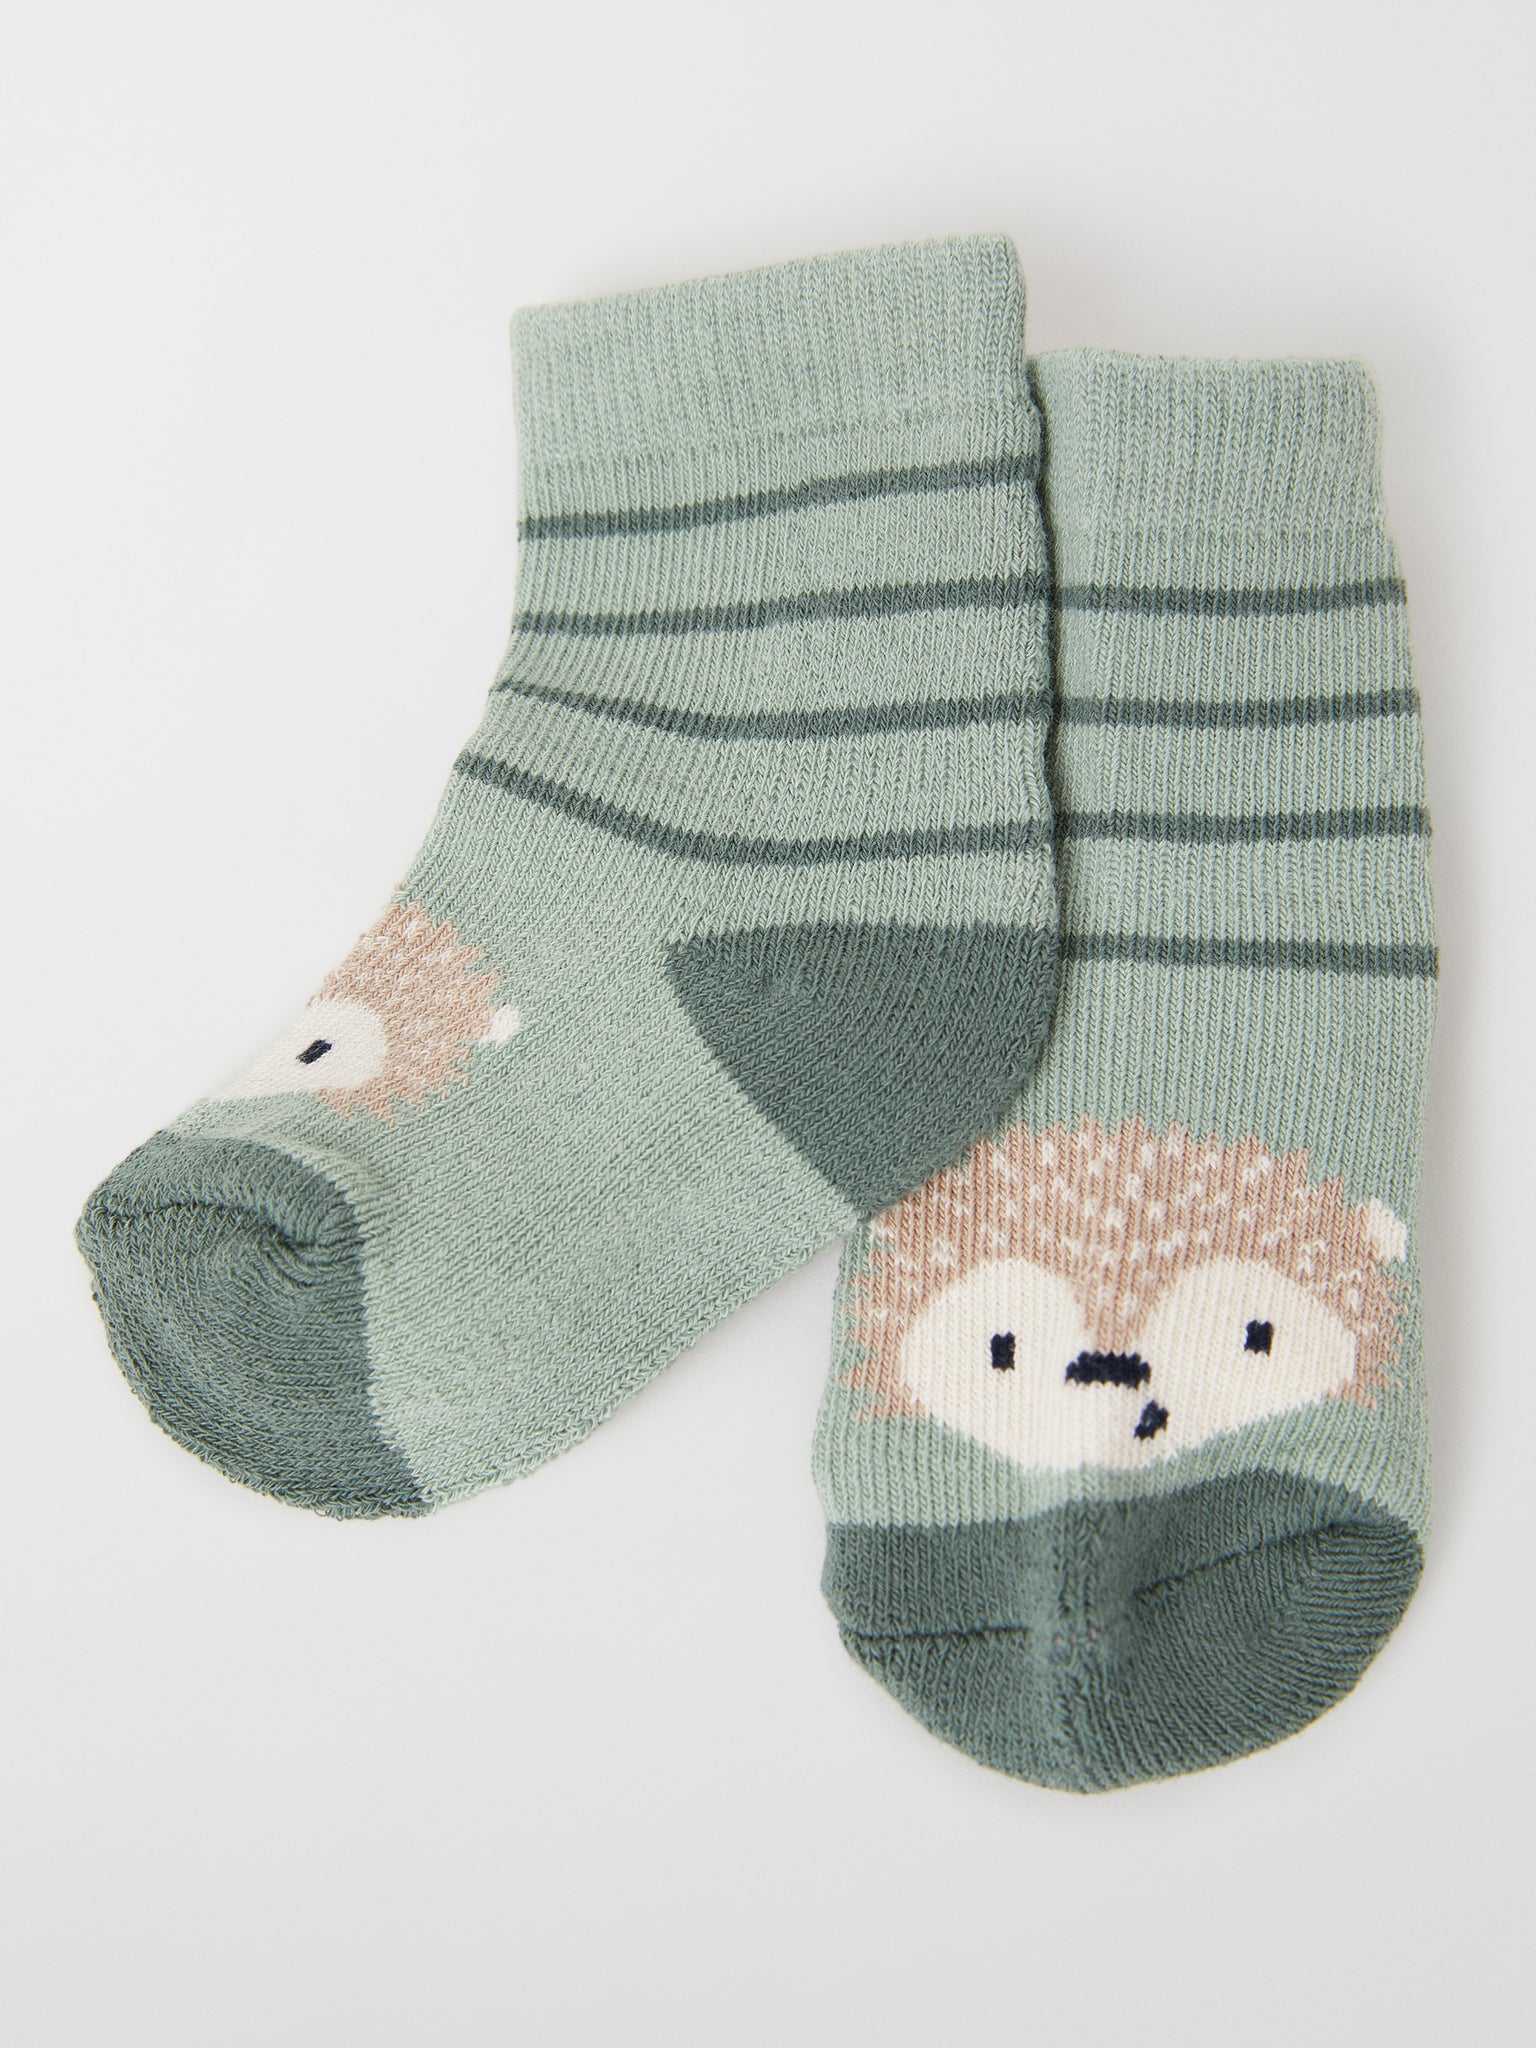 Organic Cotton Green Baby Socks from the Polarn O. Pyret baby collection. The best ethical baby clothes